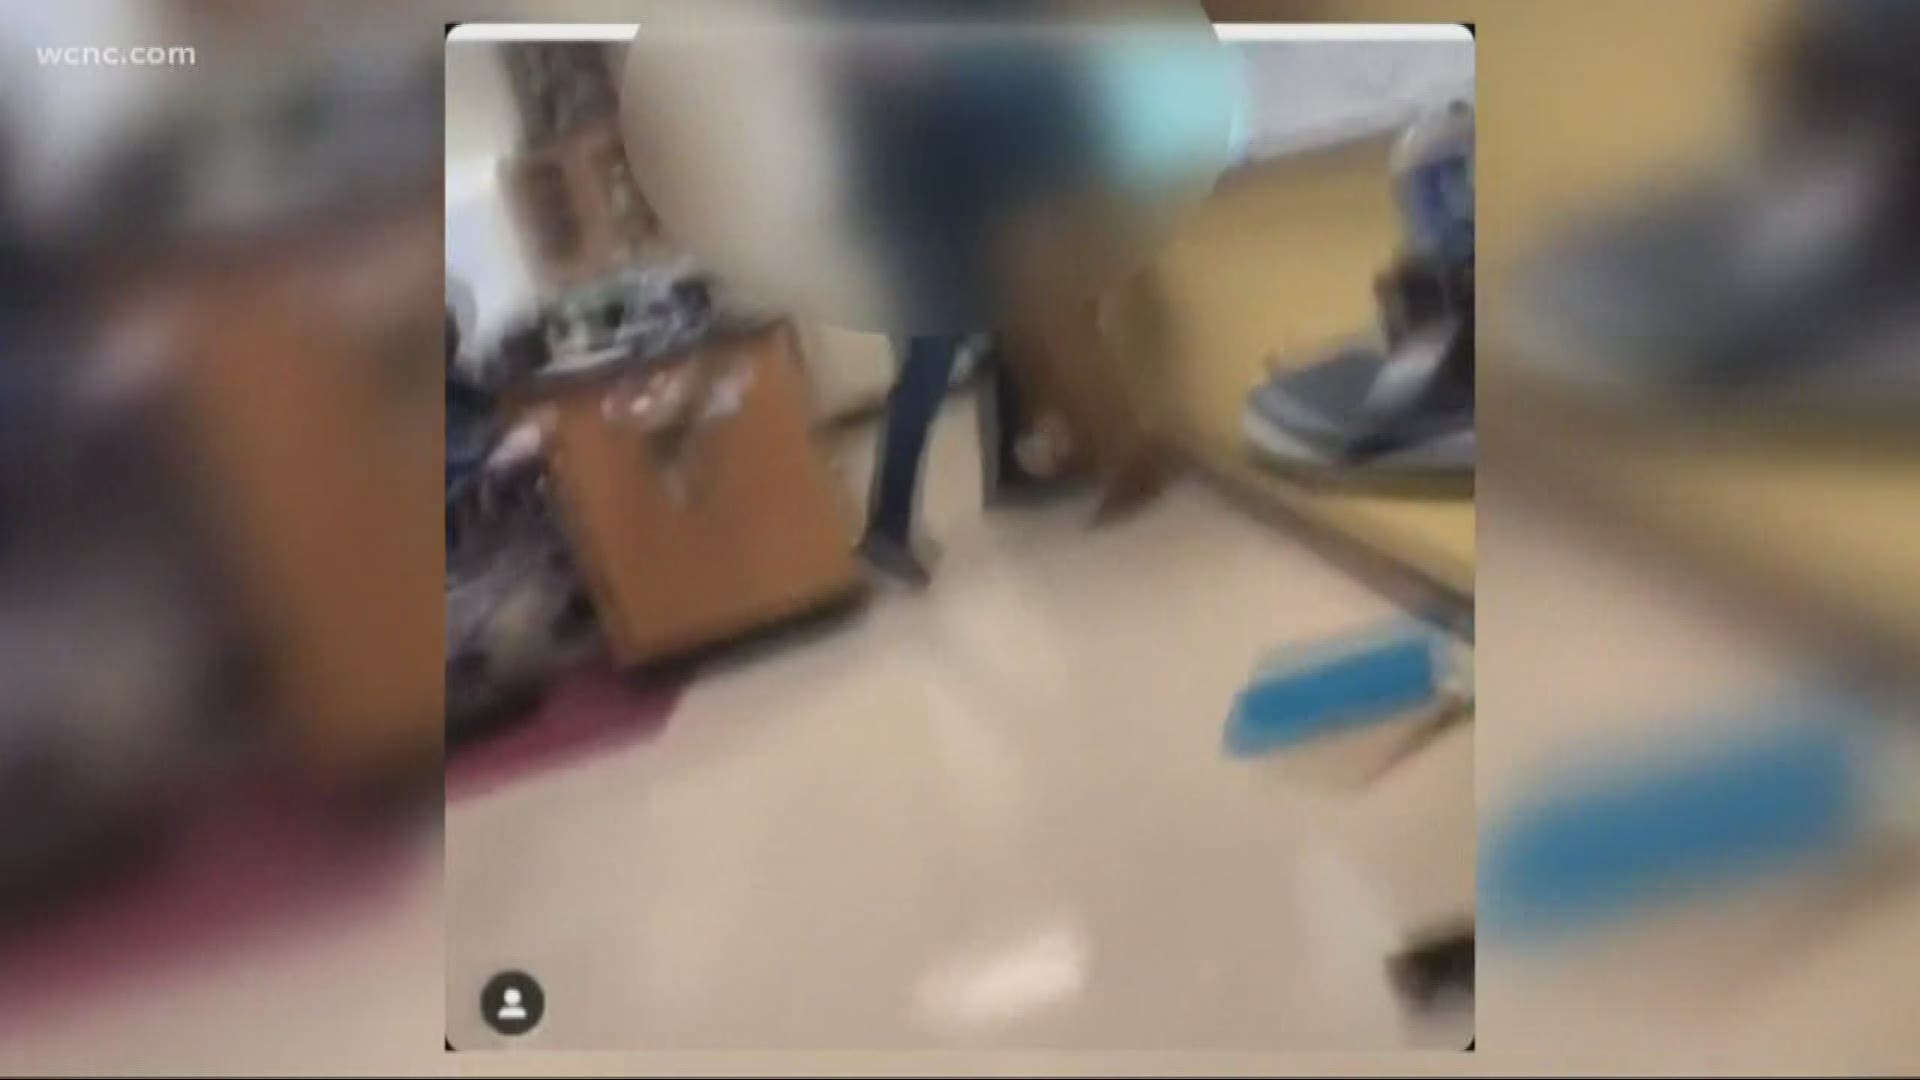 Charlotte-Mecklenburg Schools confirmed a student threatened and assaulted a staff member Monday morning.